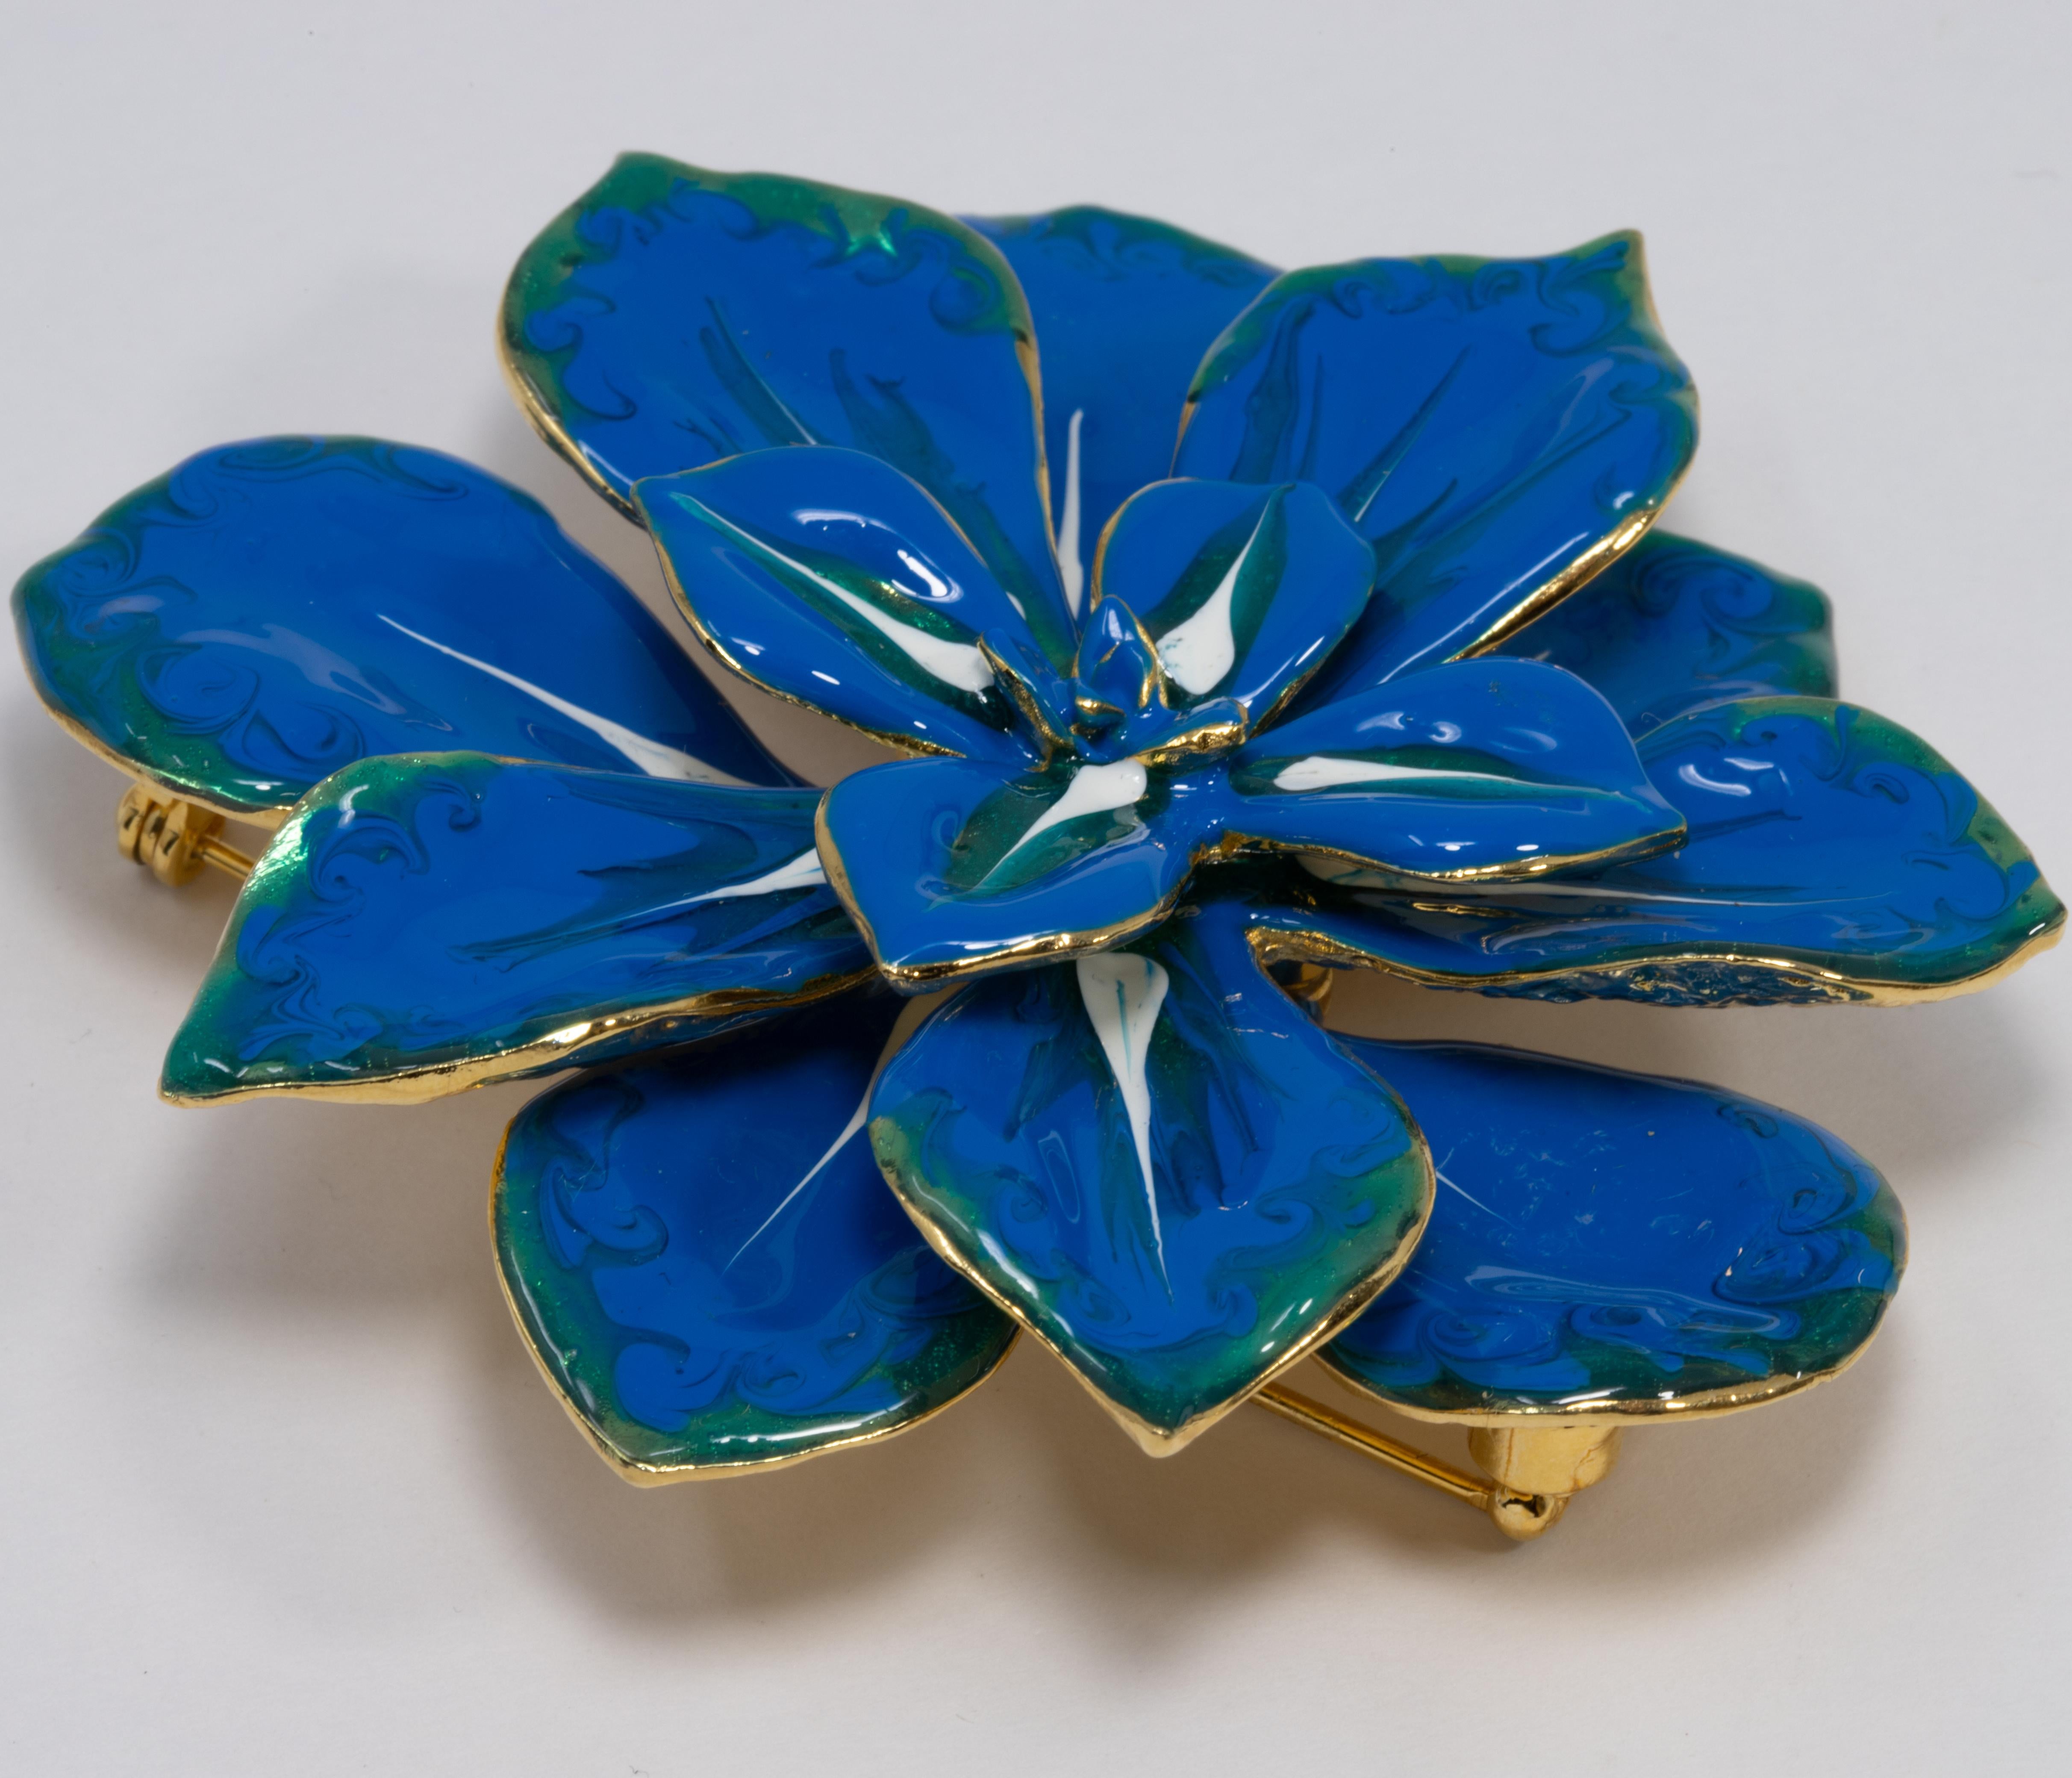 KJL Kenneth Jay Lane Blooming Flower Blue and White Enamel Pin Brooch in Gold In New Condition For Sale In Milford, DE